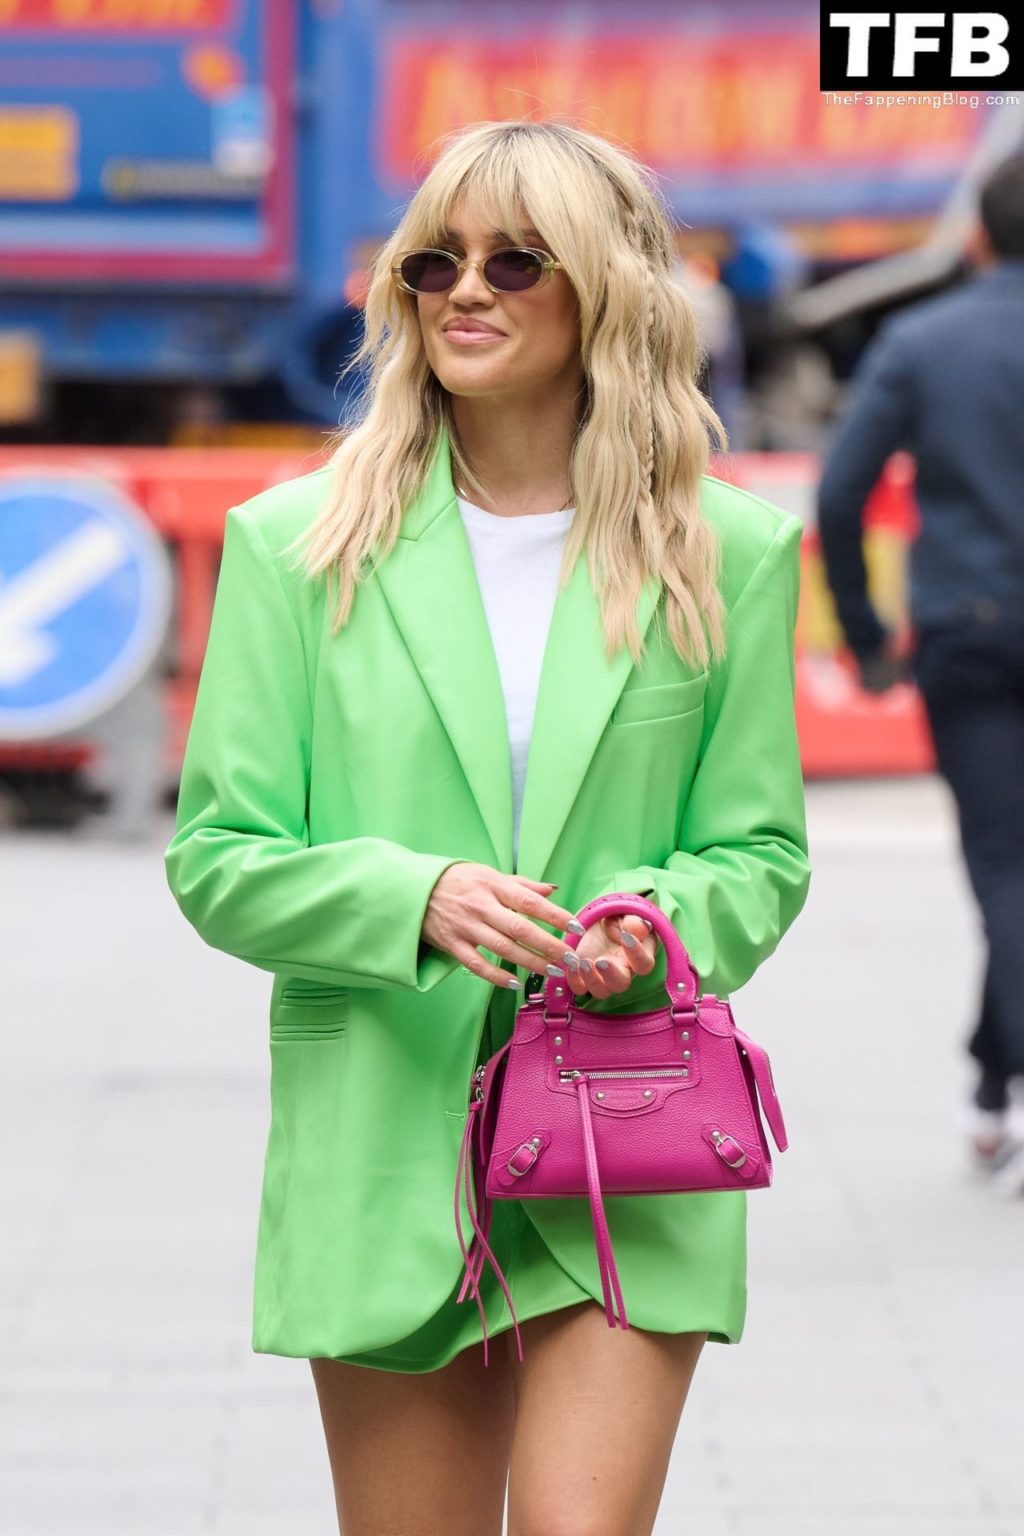 Leggy Ashley Roberts is pictured Leaving in Style from the Global Radio Studios in London (11 Photos)